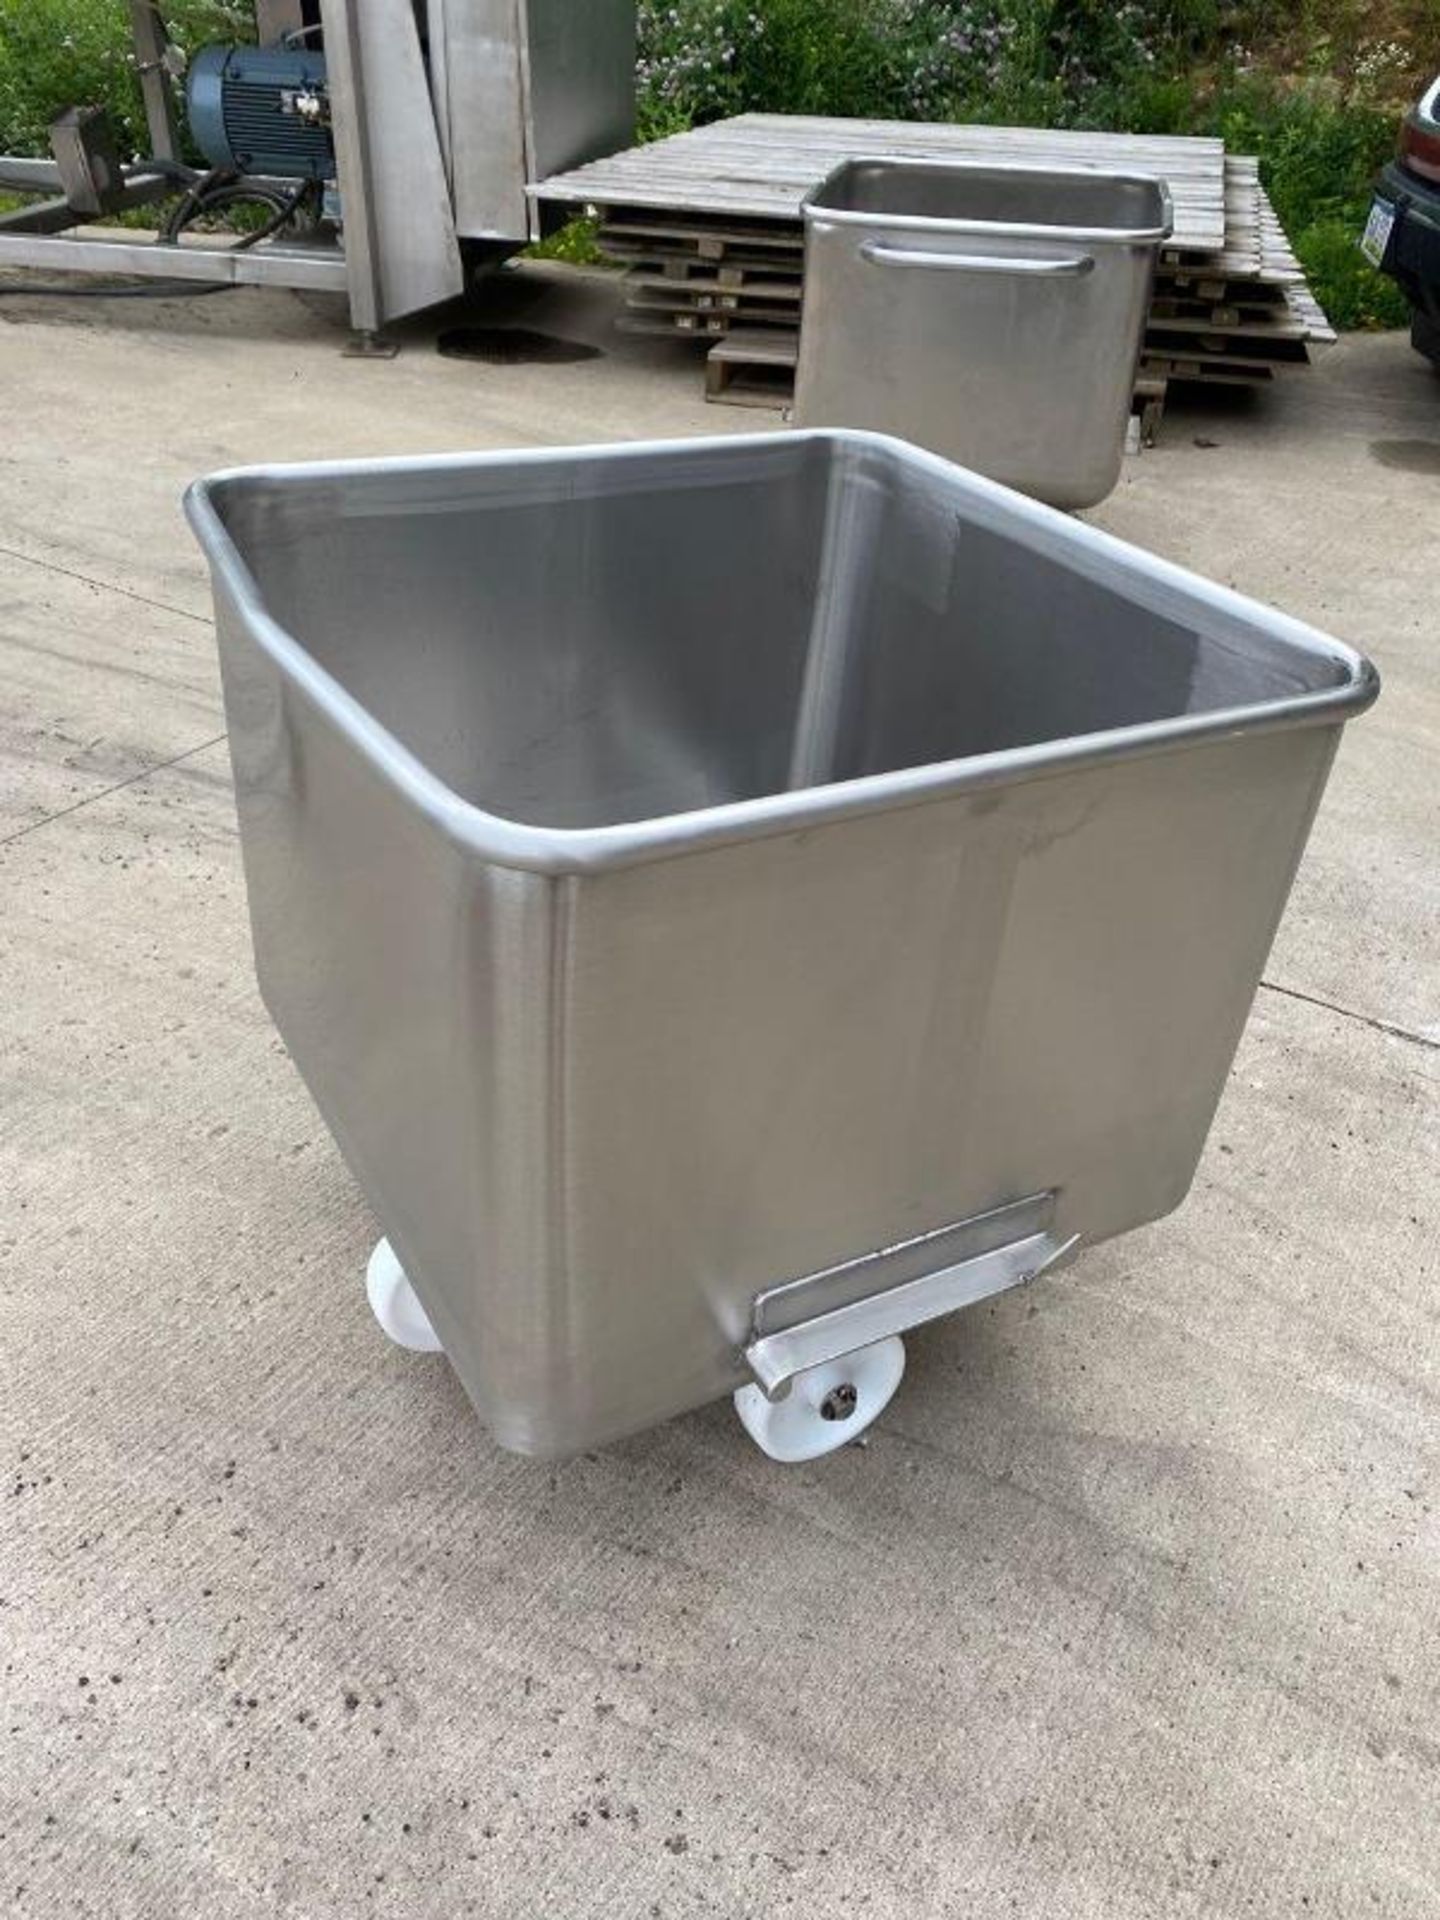 Stainless Steel Dump Buggies, 400 Lb. capacity with handle, new, never used, Located in Sandwich, IL - Image 3 of 4